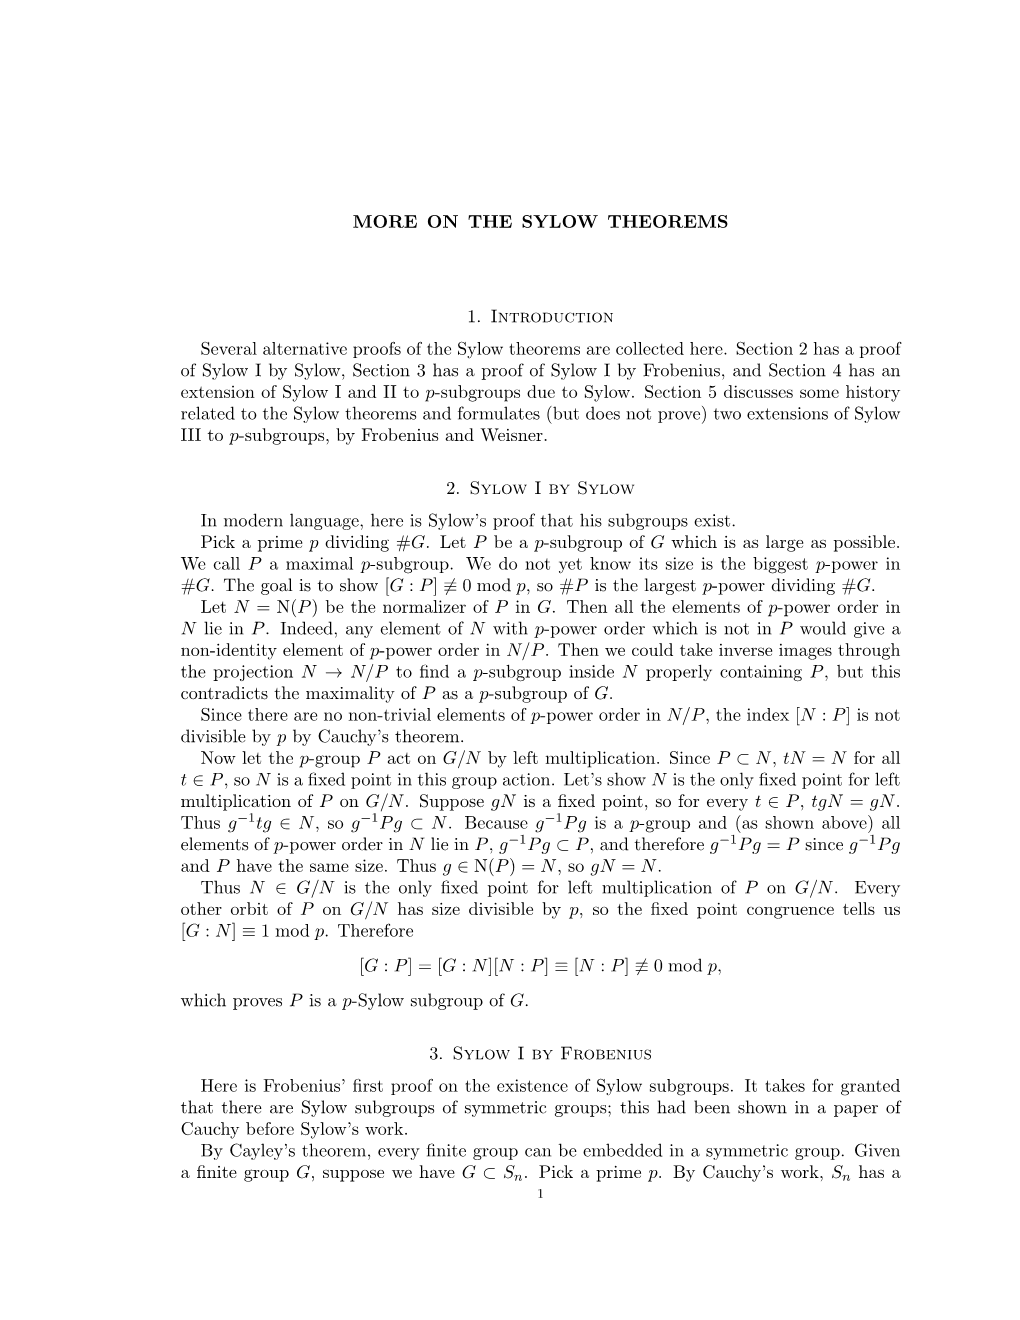 More on the Sylow Theorems